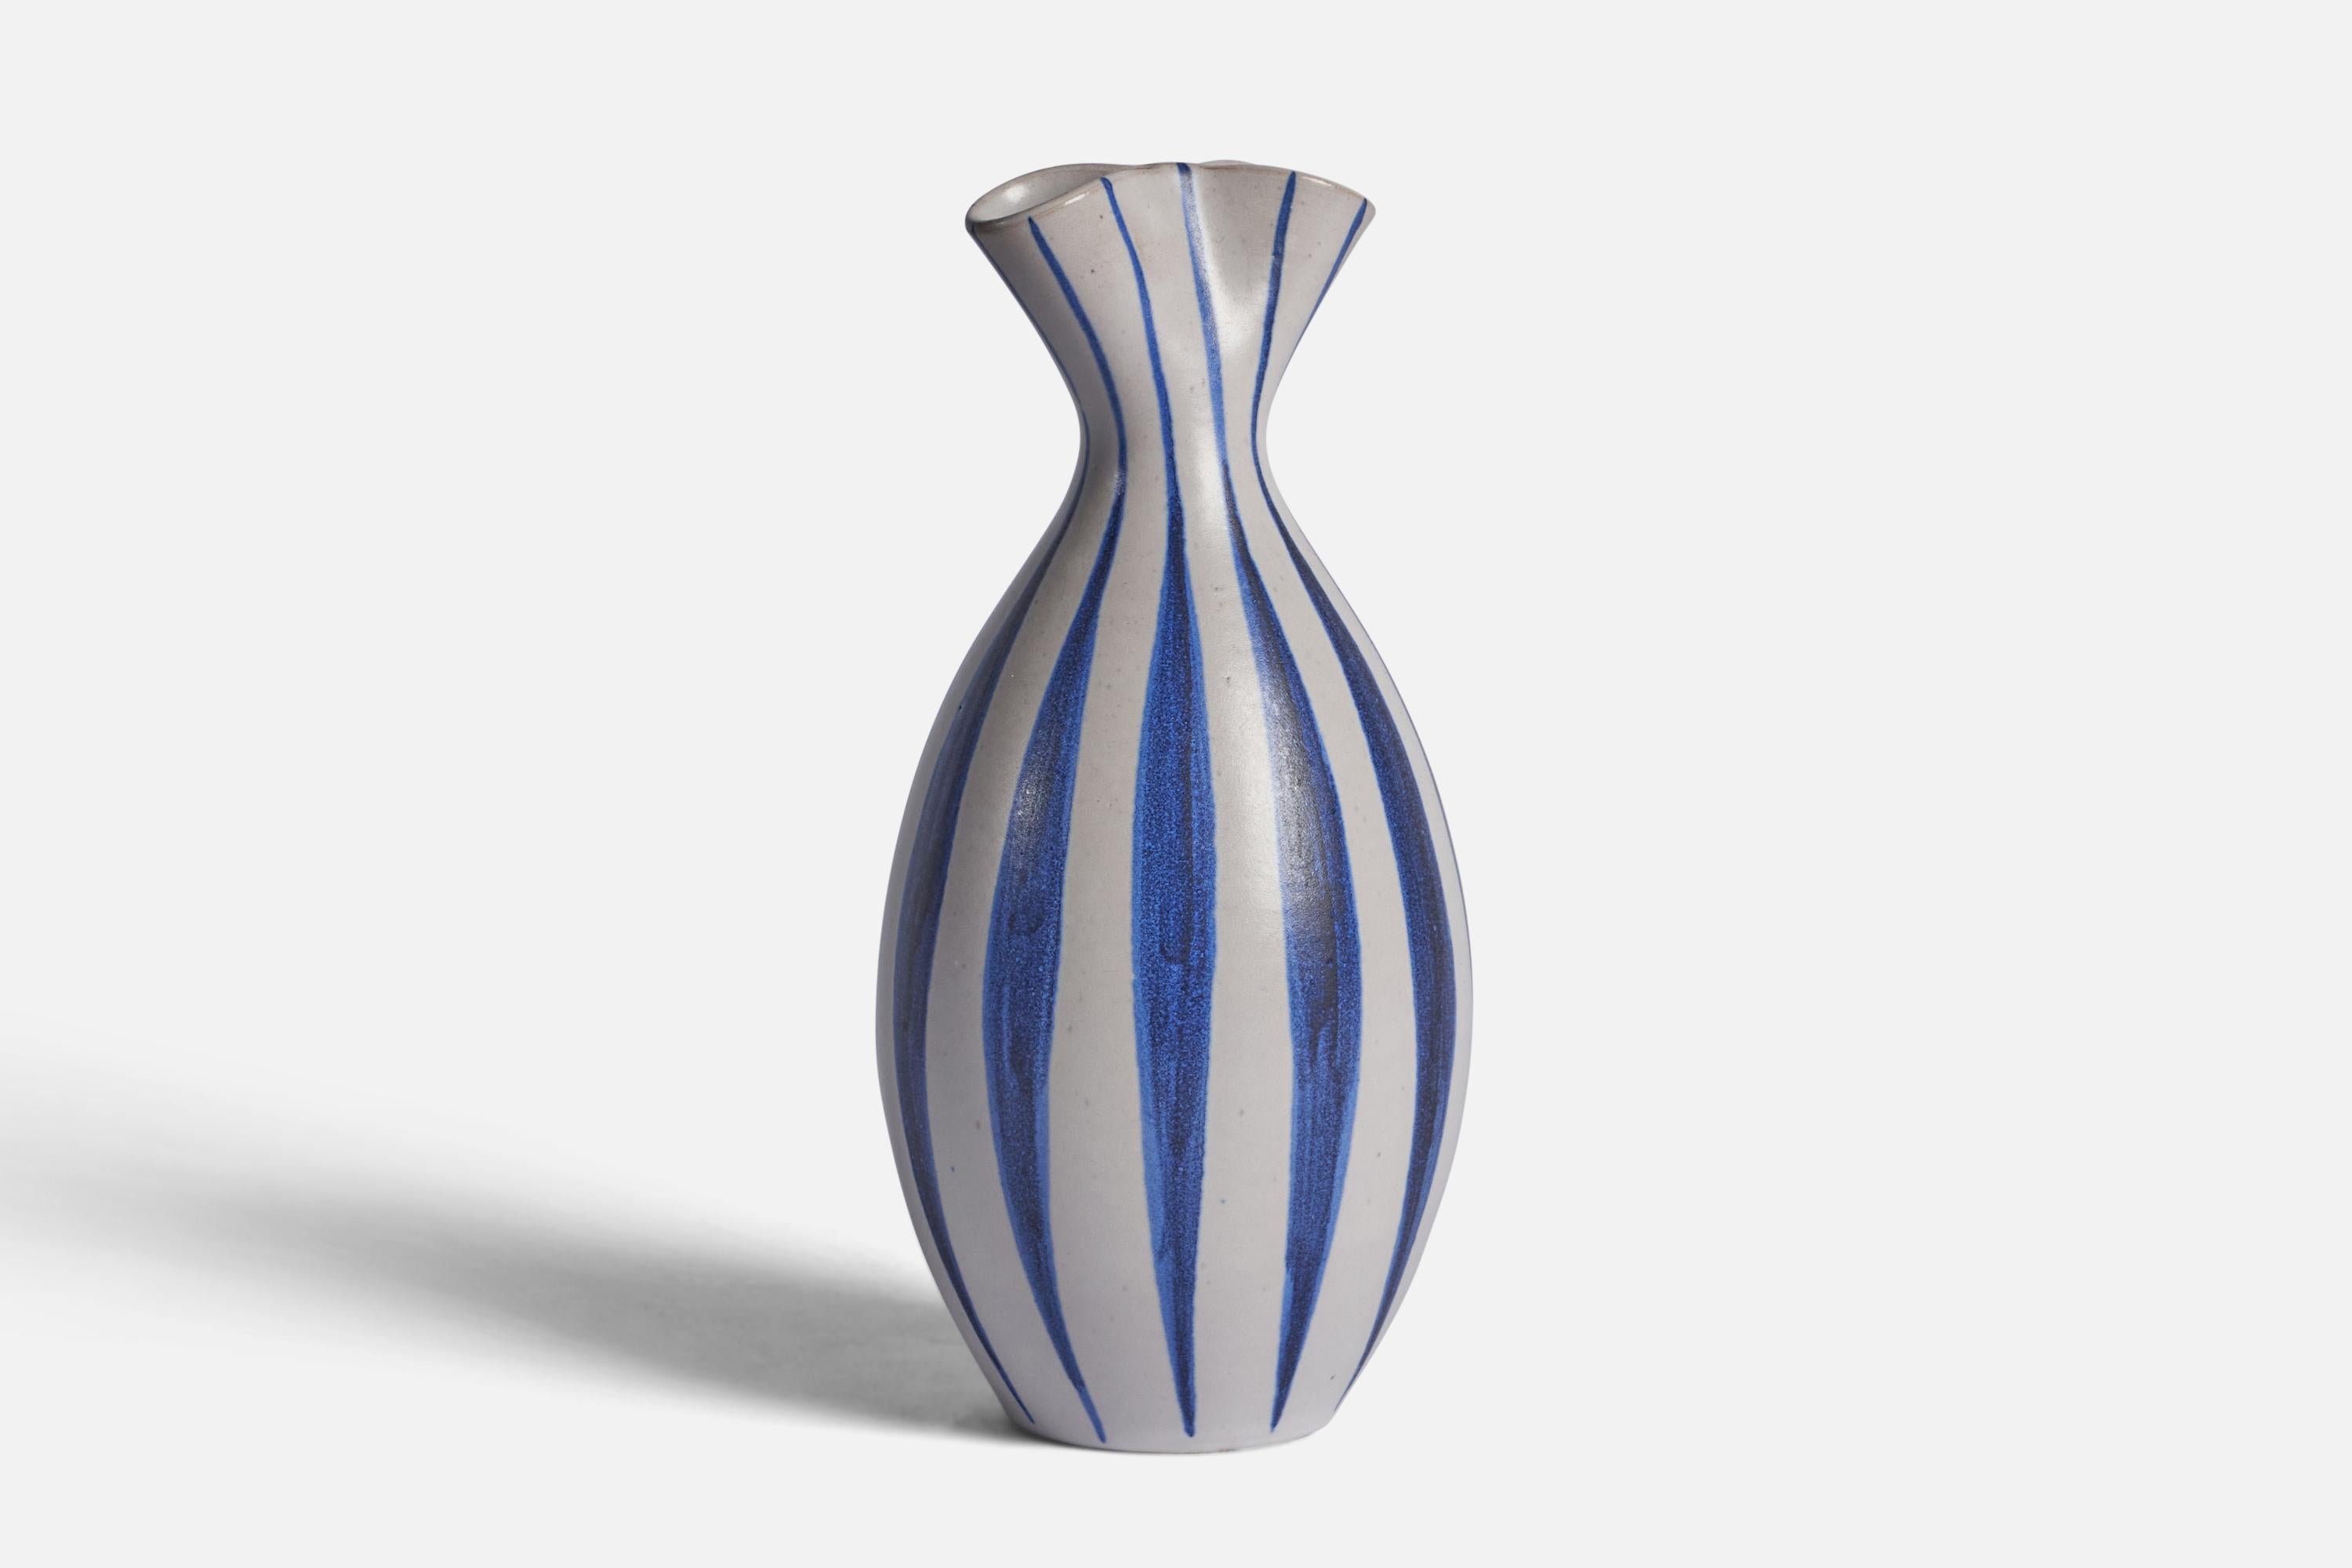 A hand-painted white and blue stoneware vase designed by Mette Doller and produced by Andersson & Johansson, Höganäs, Sweden, 1950s.